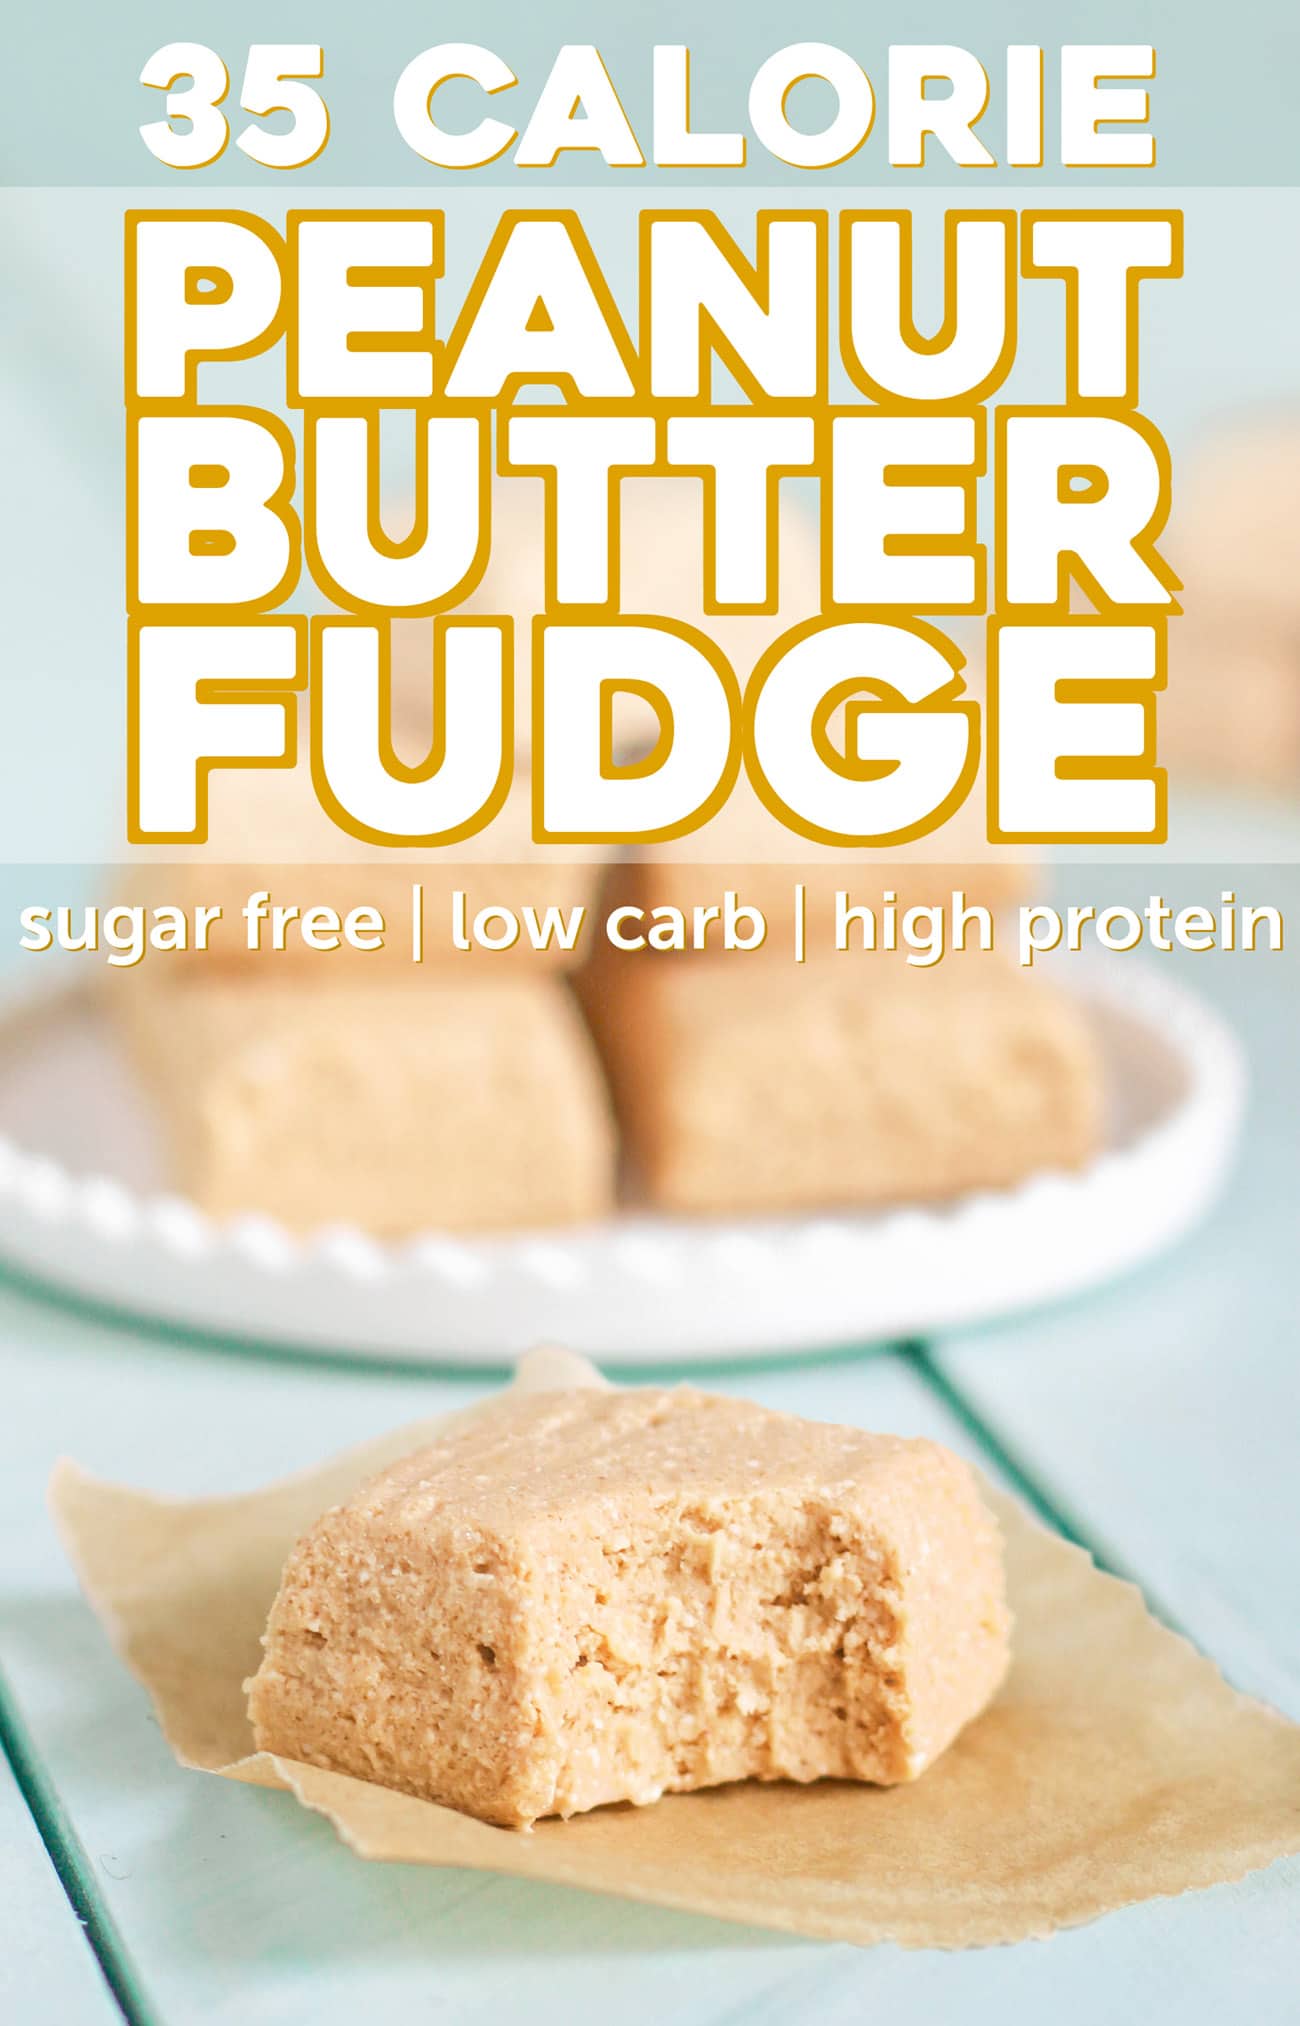 This 35-calorie Peanut Butter Fudge is rich and sweet, yet secretly healthy with only 1g of fat plus 4.5g of protein! No need for the butter, sugar, and corn syrup. You'd never know it's sugar free, low carb, keto-friendly, low fat, and high protein!